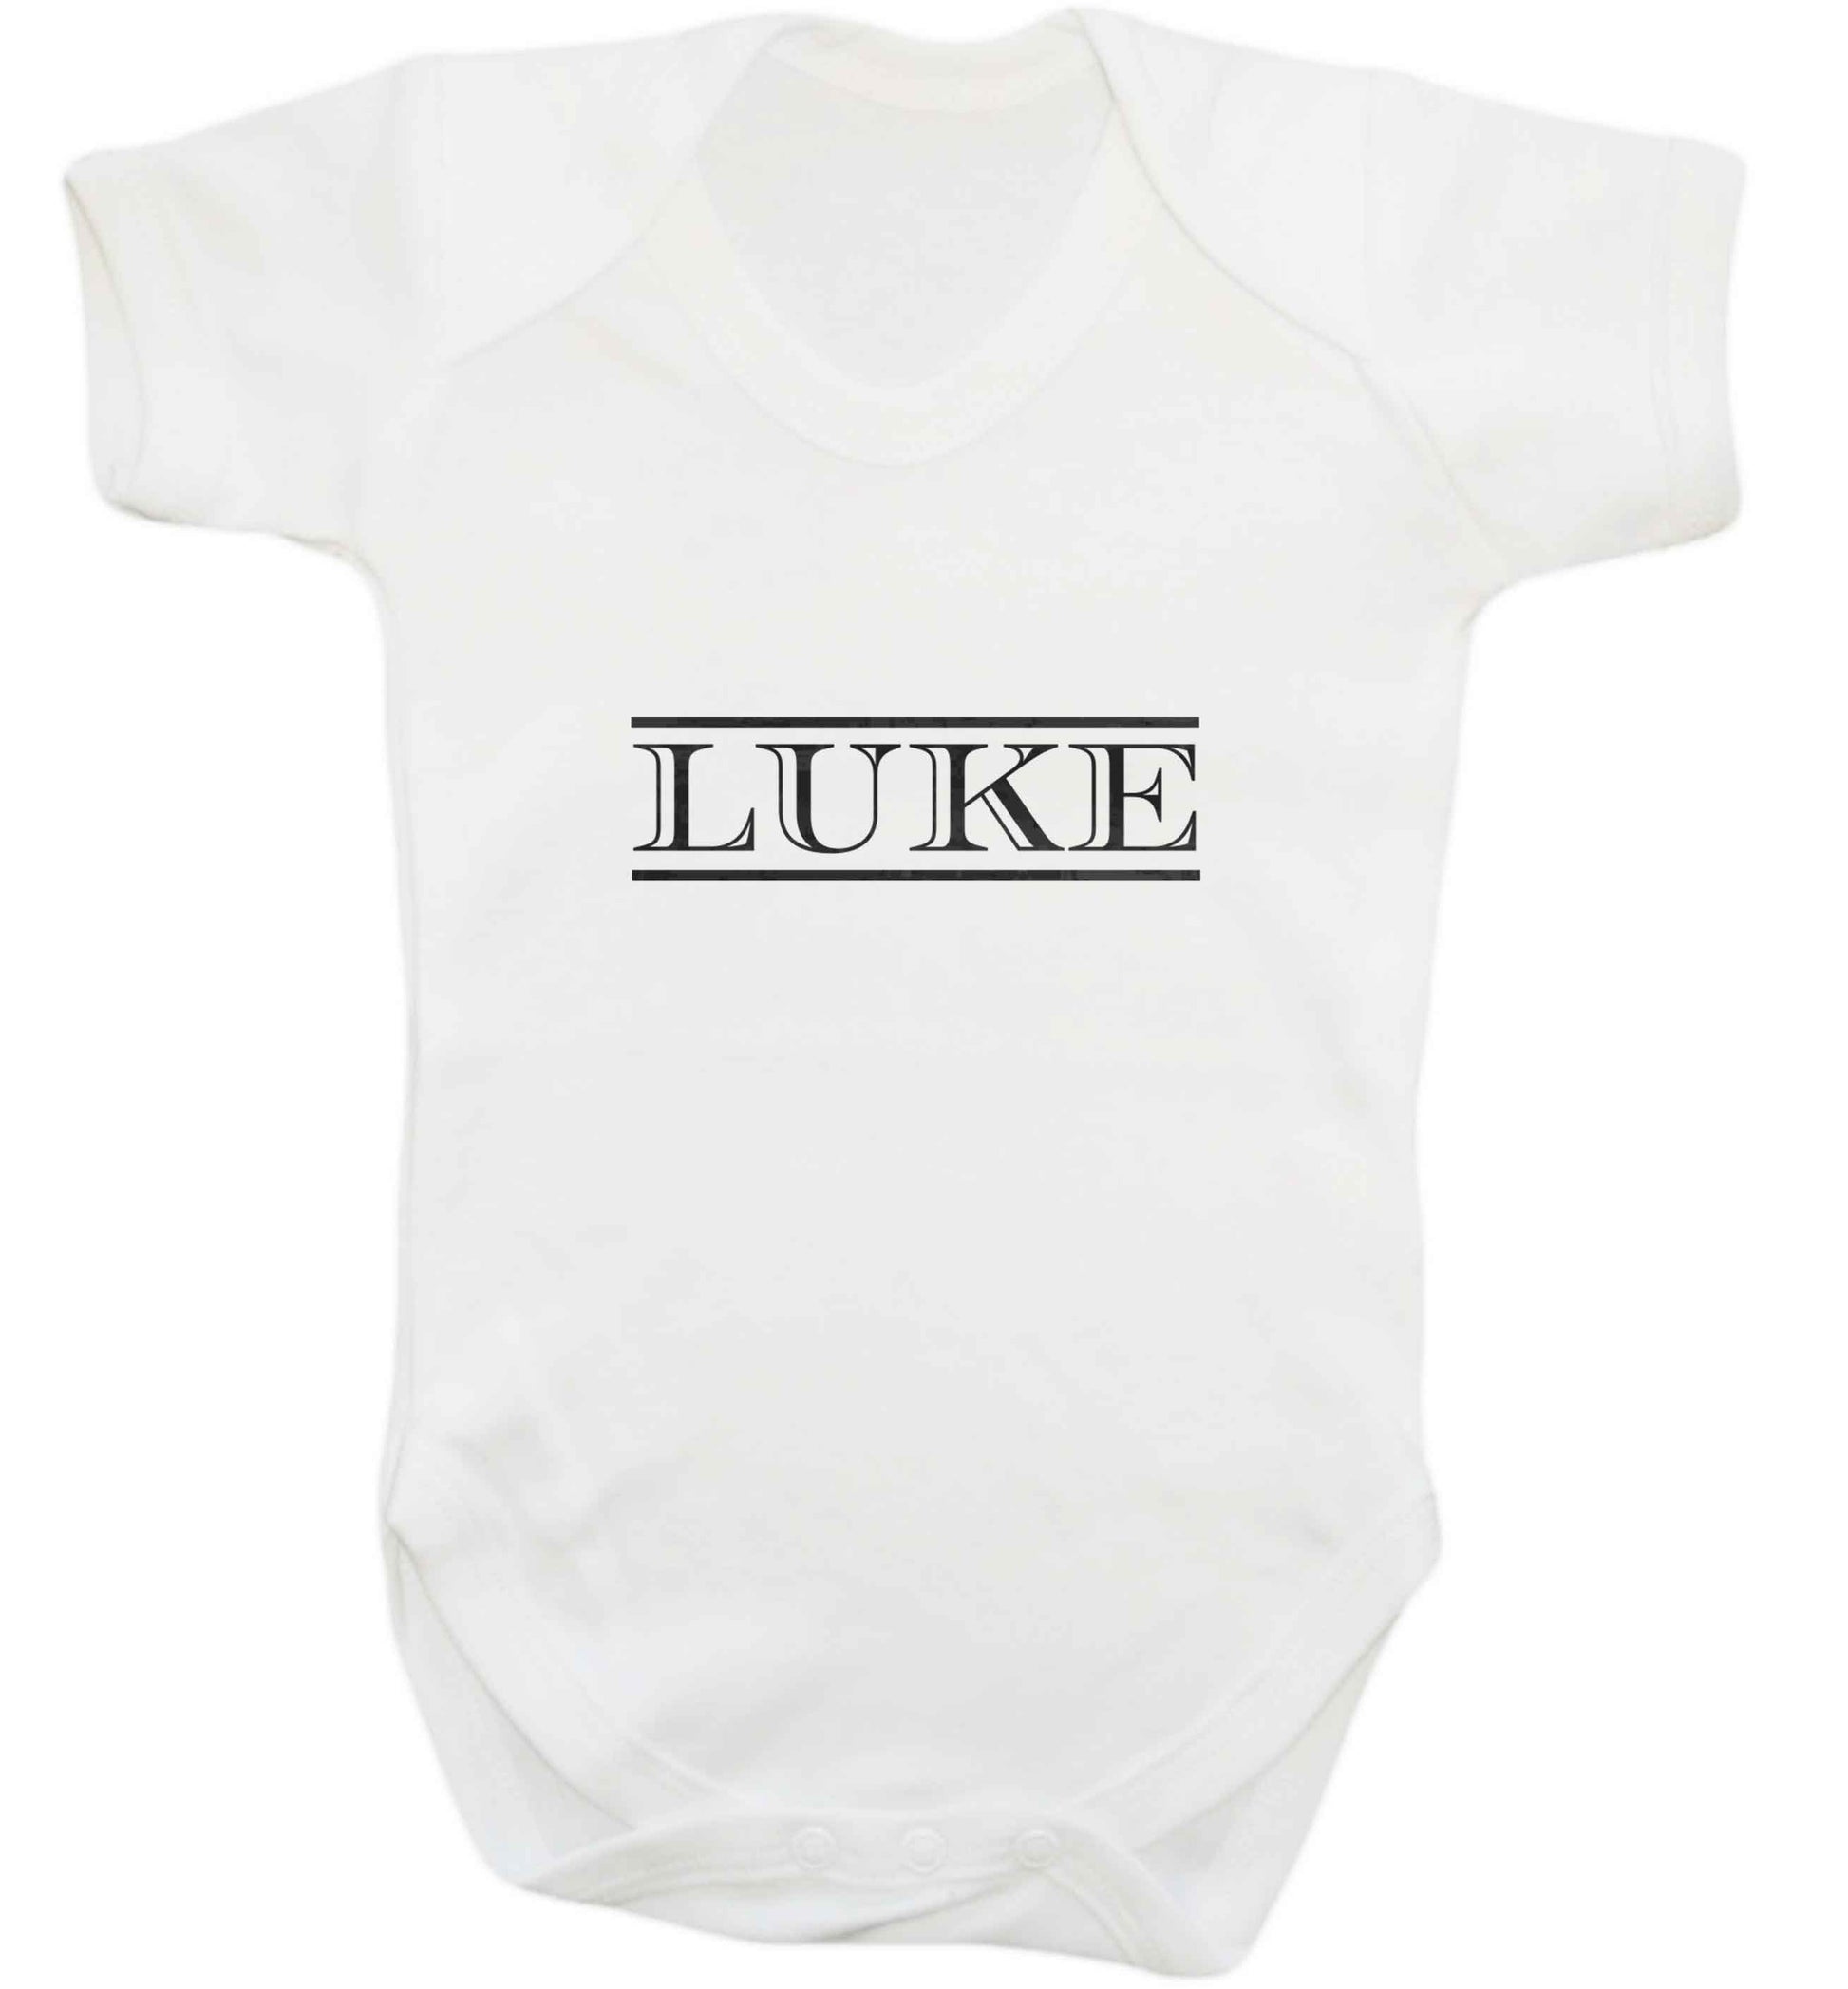 Personalised name baby vest white 18-24 months